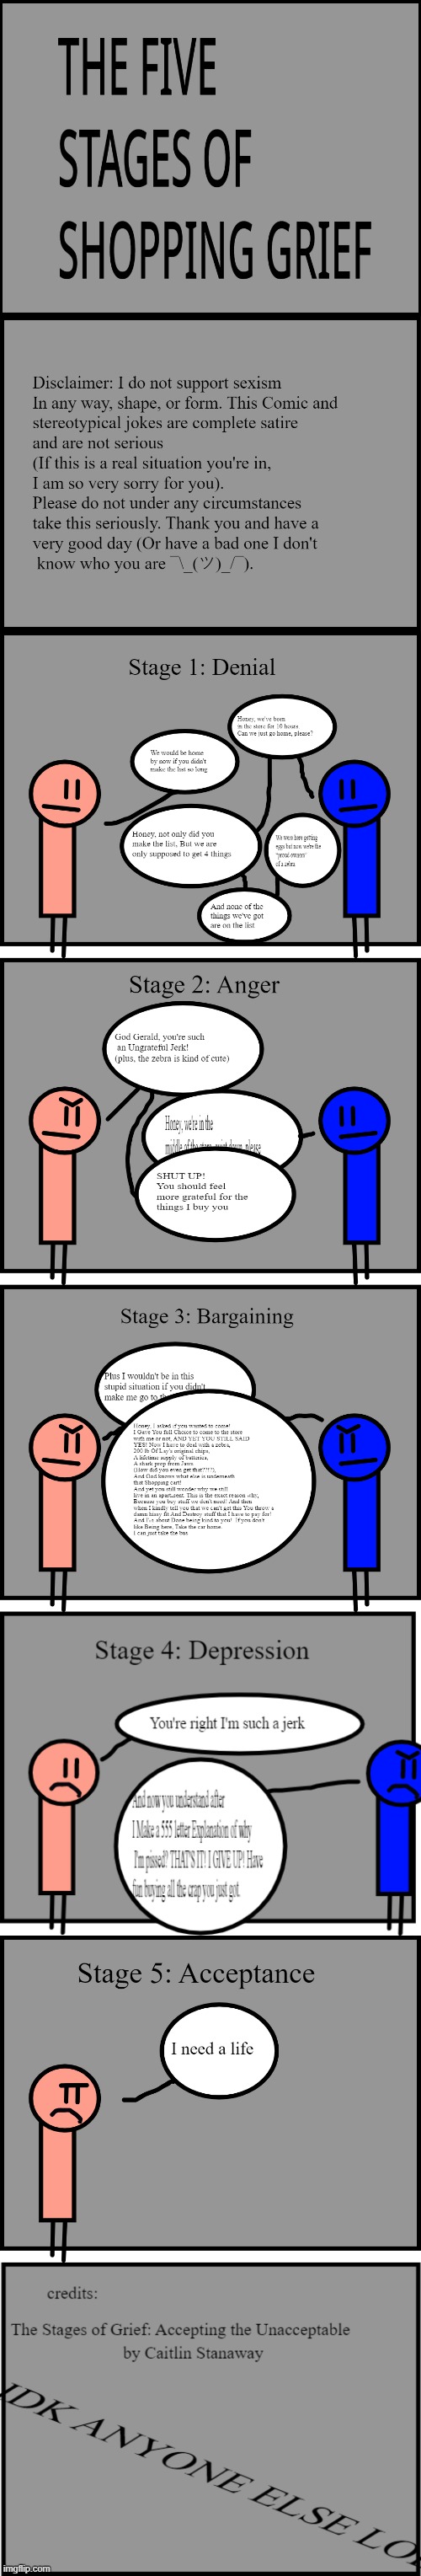 the five stages of shopping grief by me | image tagged in comics | made w/ Imgflip meme maker